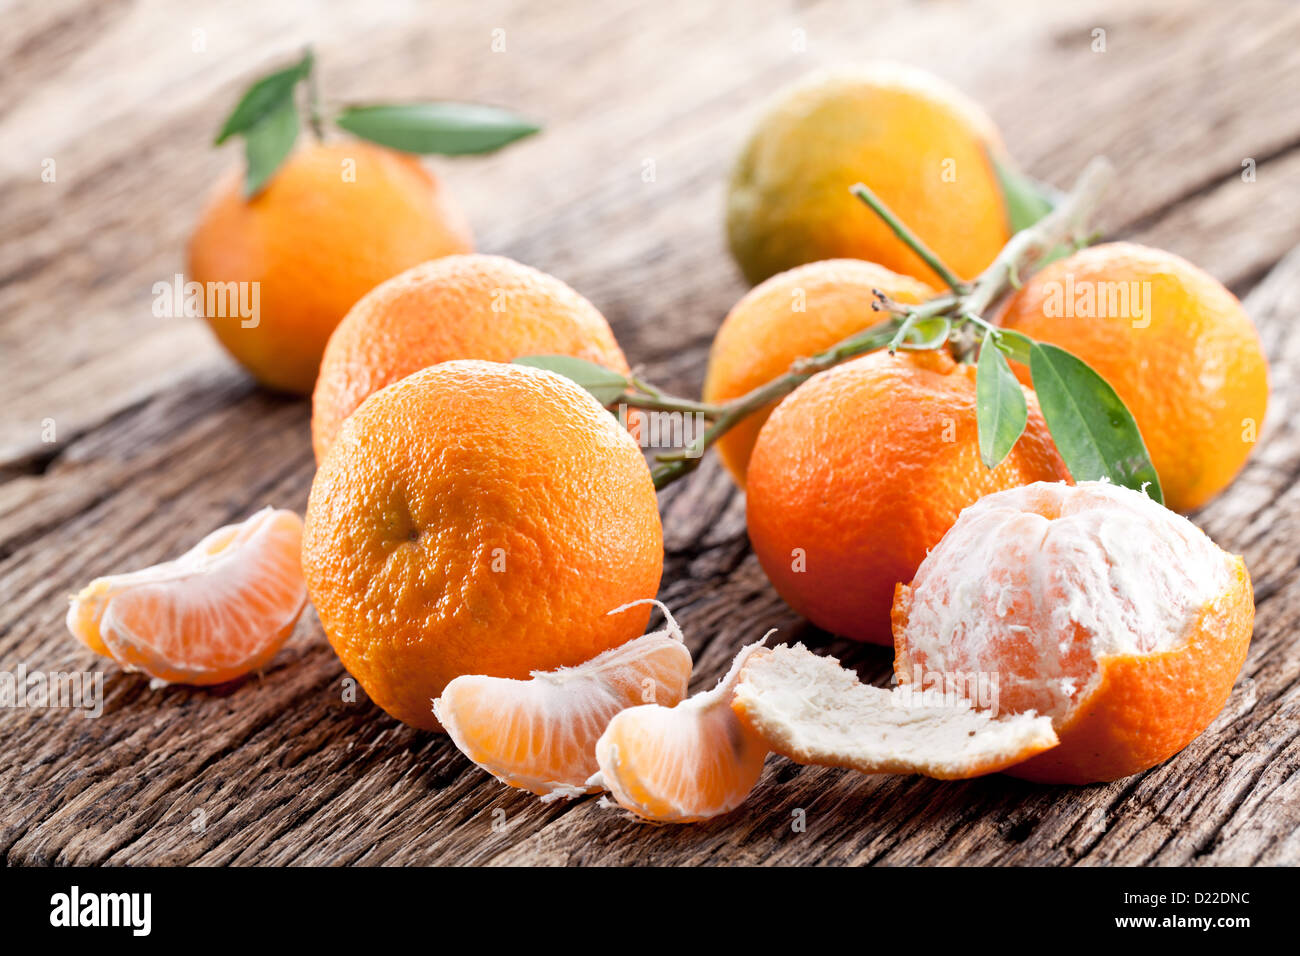 Tangerines with leaves on a wooden table. Stock Photo